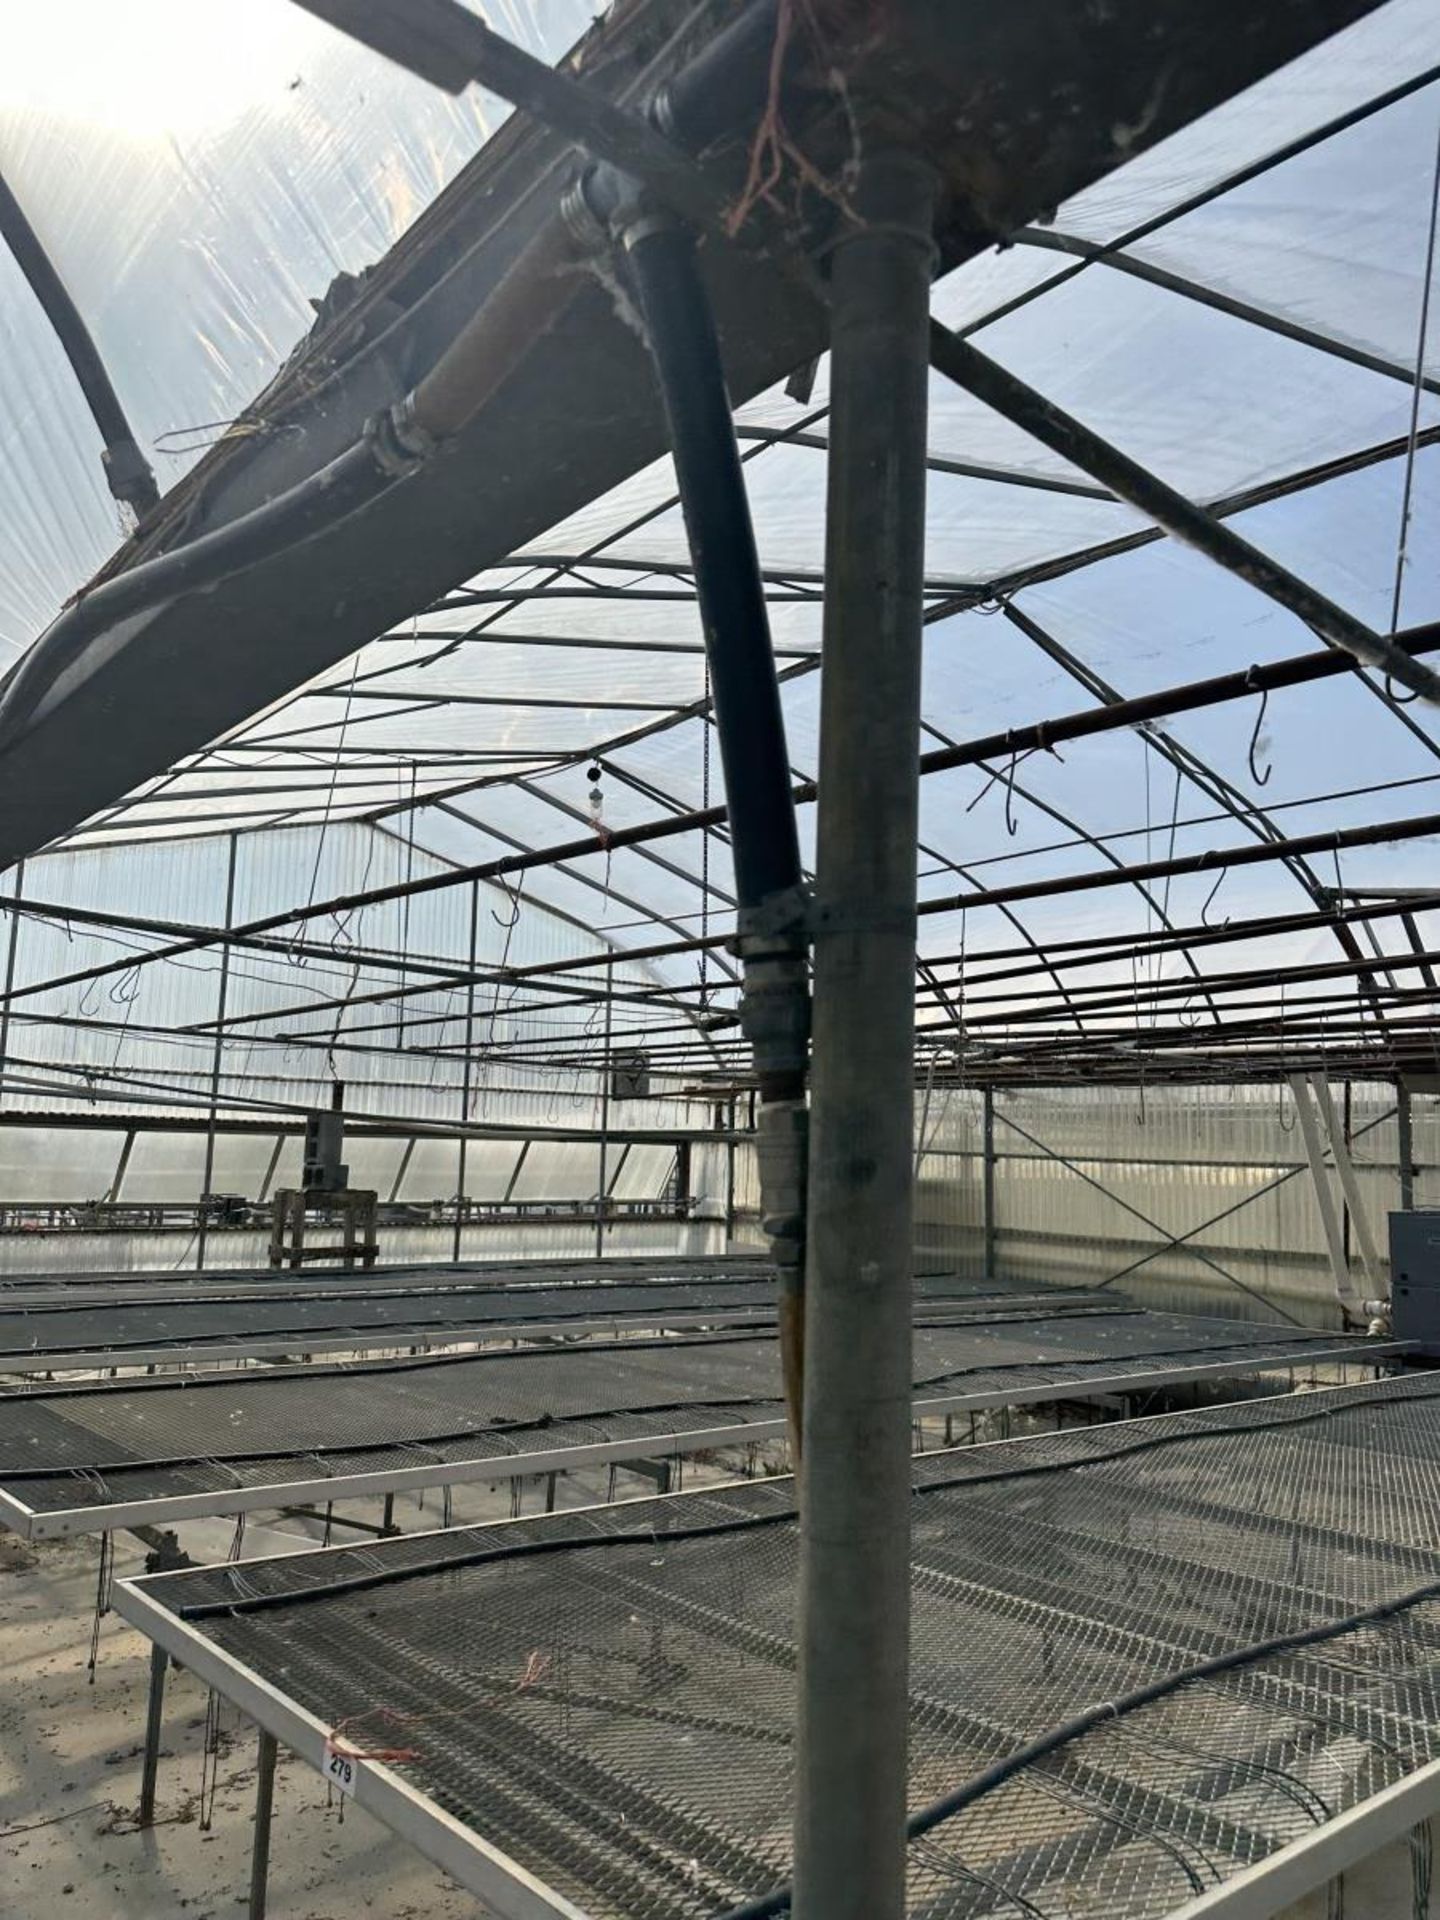 WESTBROOK GUTTER CONNECT 2-BAY GREENHOUSE 60FT X 144FT X 96” H & 2-BAY 60FT X 72 FT X 96”, INCLUDING - Image 59 of 95